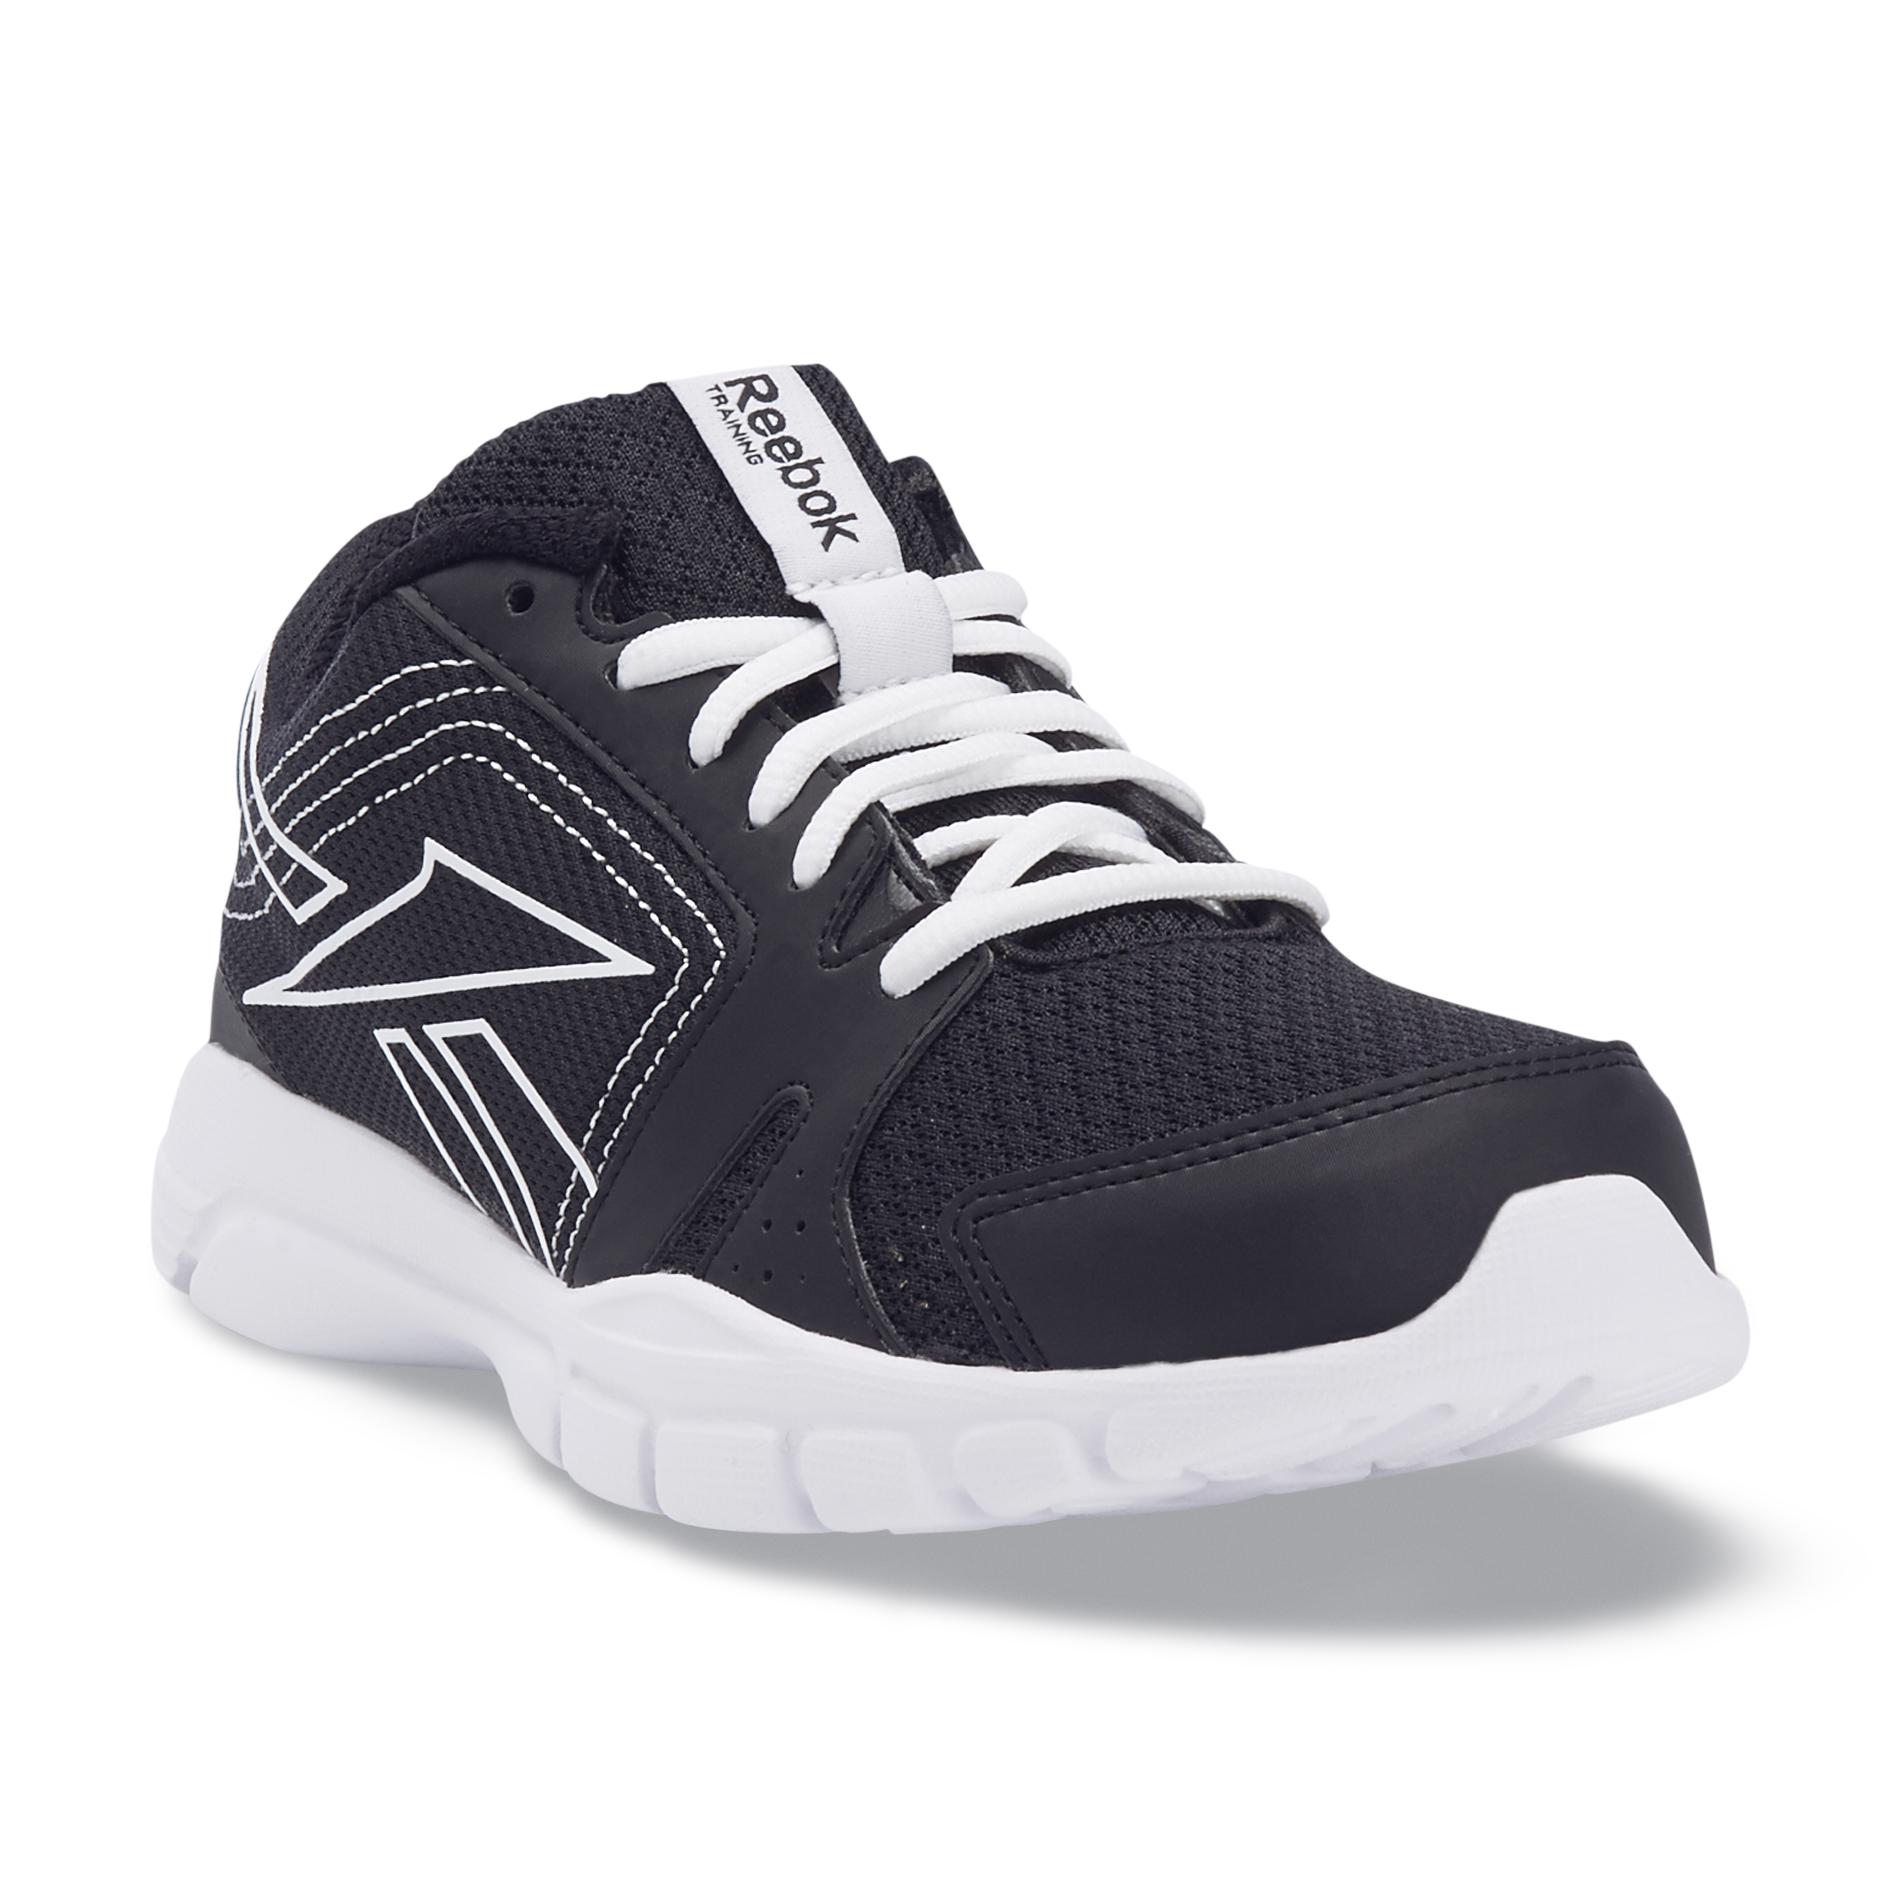 Reebok Women's Trainfusion RS Black Cross-Trainer Shoes